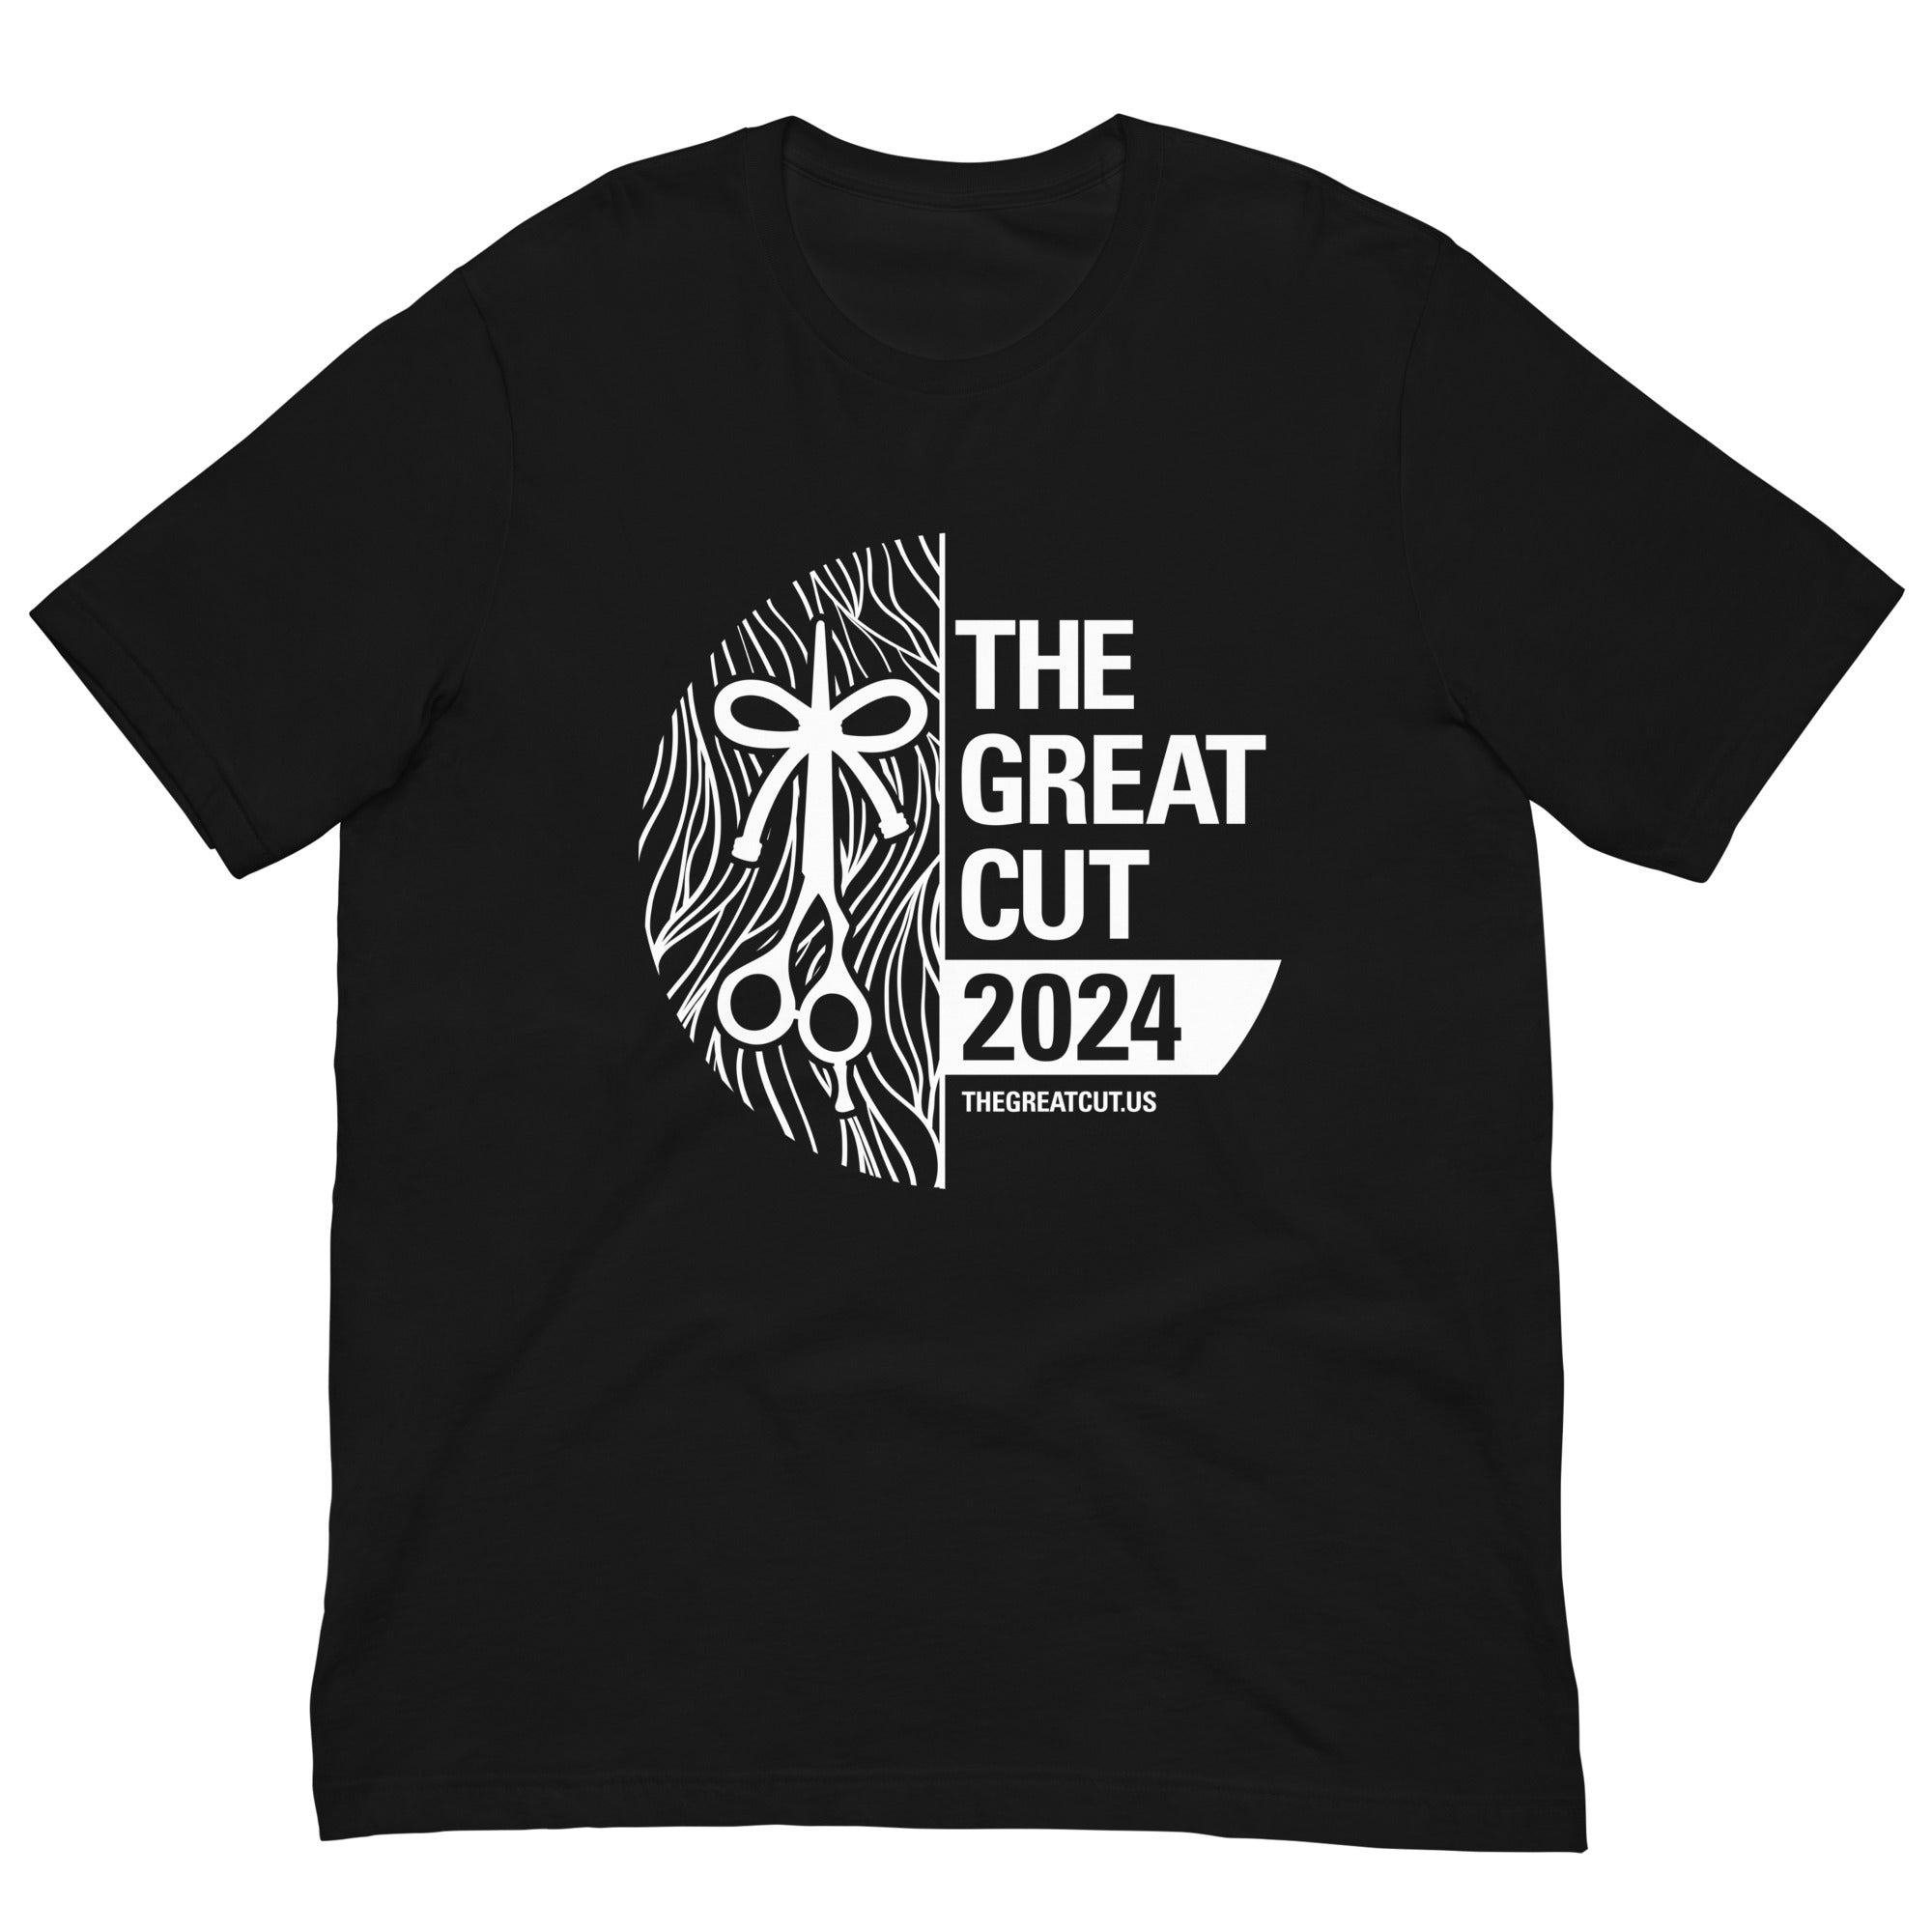 Attend The Great Cut The Biggest Charity Party in 2024